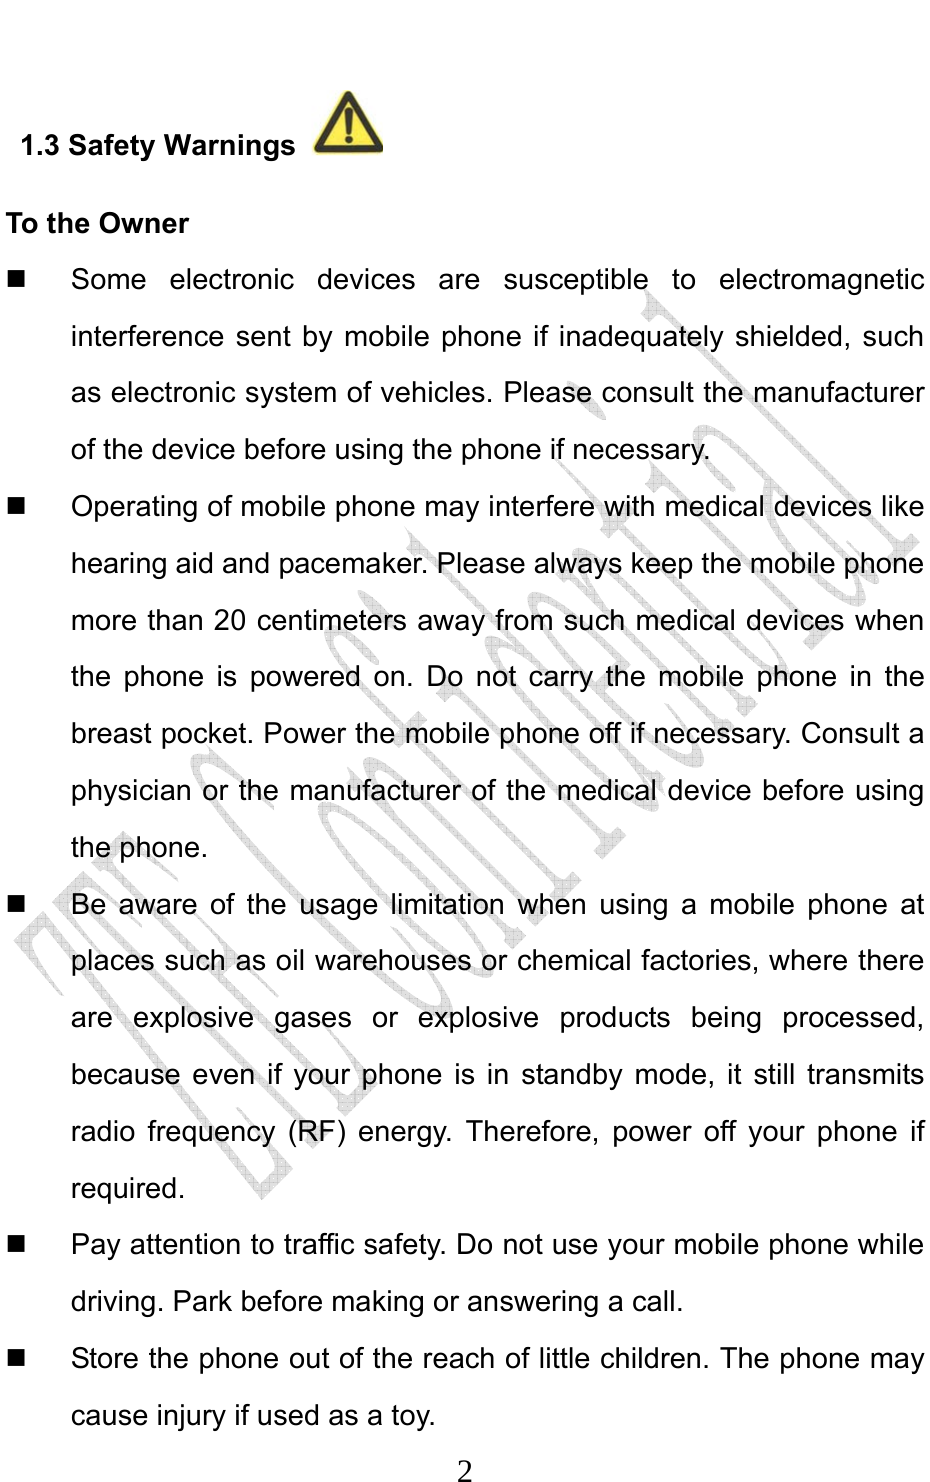                              21.3 Safety Warnings   To the Owner  Some electronic devices are susceptible to electromagnetic interference sent by mobile phone if inadequately shielded, such as electronic system of vehicles. Please consult the manufacturer of the device before using the phone if necessary.   Operating of mobile phone may interfere with medical devices like hearing aid and pacemaker. Please always keep the mobile phone more than 20 centimeters away from such medical devices when the phone is powered on. Do not carry the mobile phone in the breast pocket. Power the mobile phone off if necessary. Consult a physician or the manufacturer of the medical device before using the phone.   Be aware of the usage limitation when using a mobile phone at places such as oil warehouses or chemical factories, where there are explosive gases or explosive products being processed, because even if your phone is in standby mode, it still transmits radio frequency (RF) energy. Therefore, power off your phone if required.   Pay attention to traffic safety. Do not use your mobile phone while driving. Park before making or answering a call.   Store the phone out of the reach of little children. The phone may cause injury if used as a toy. 